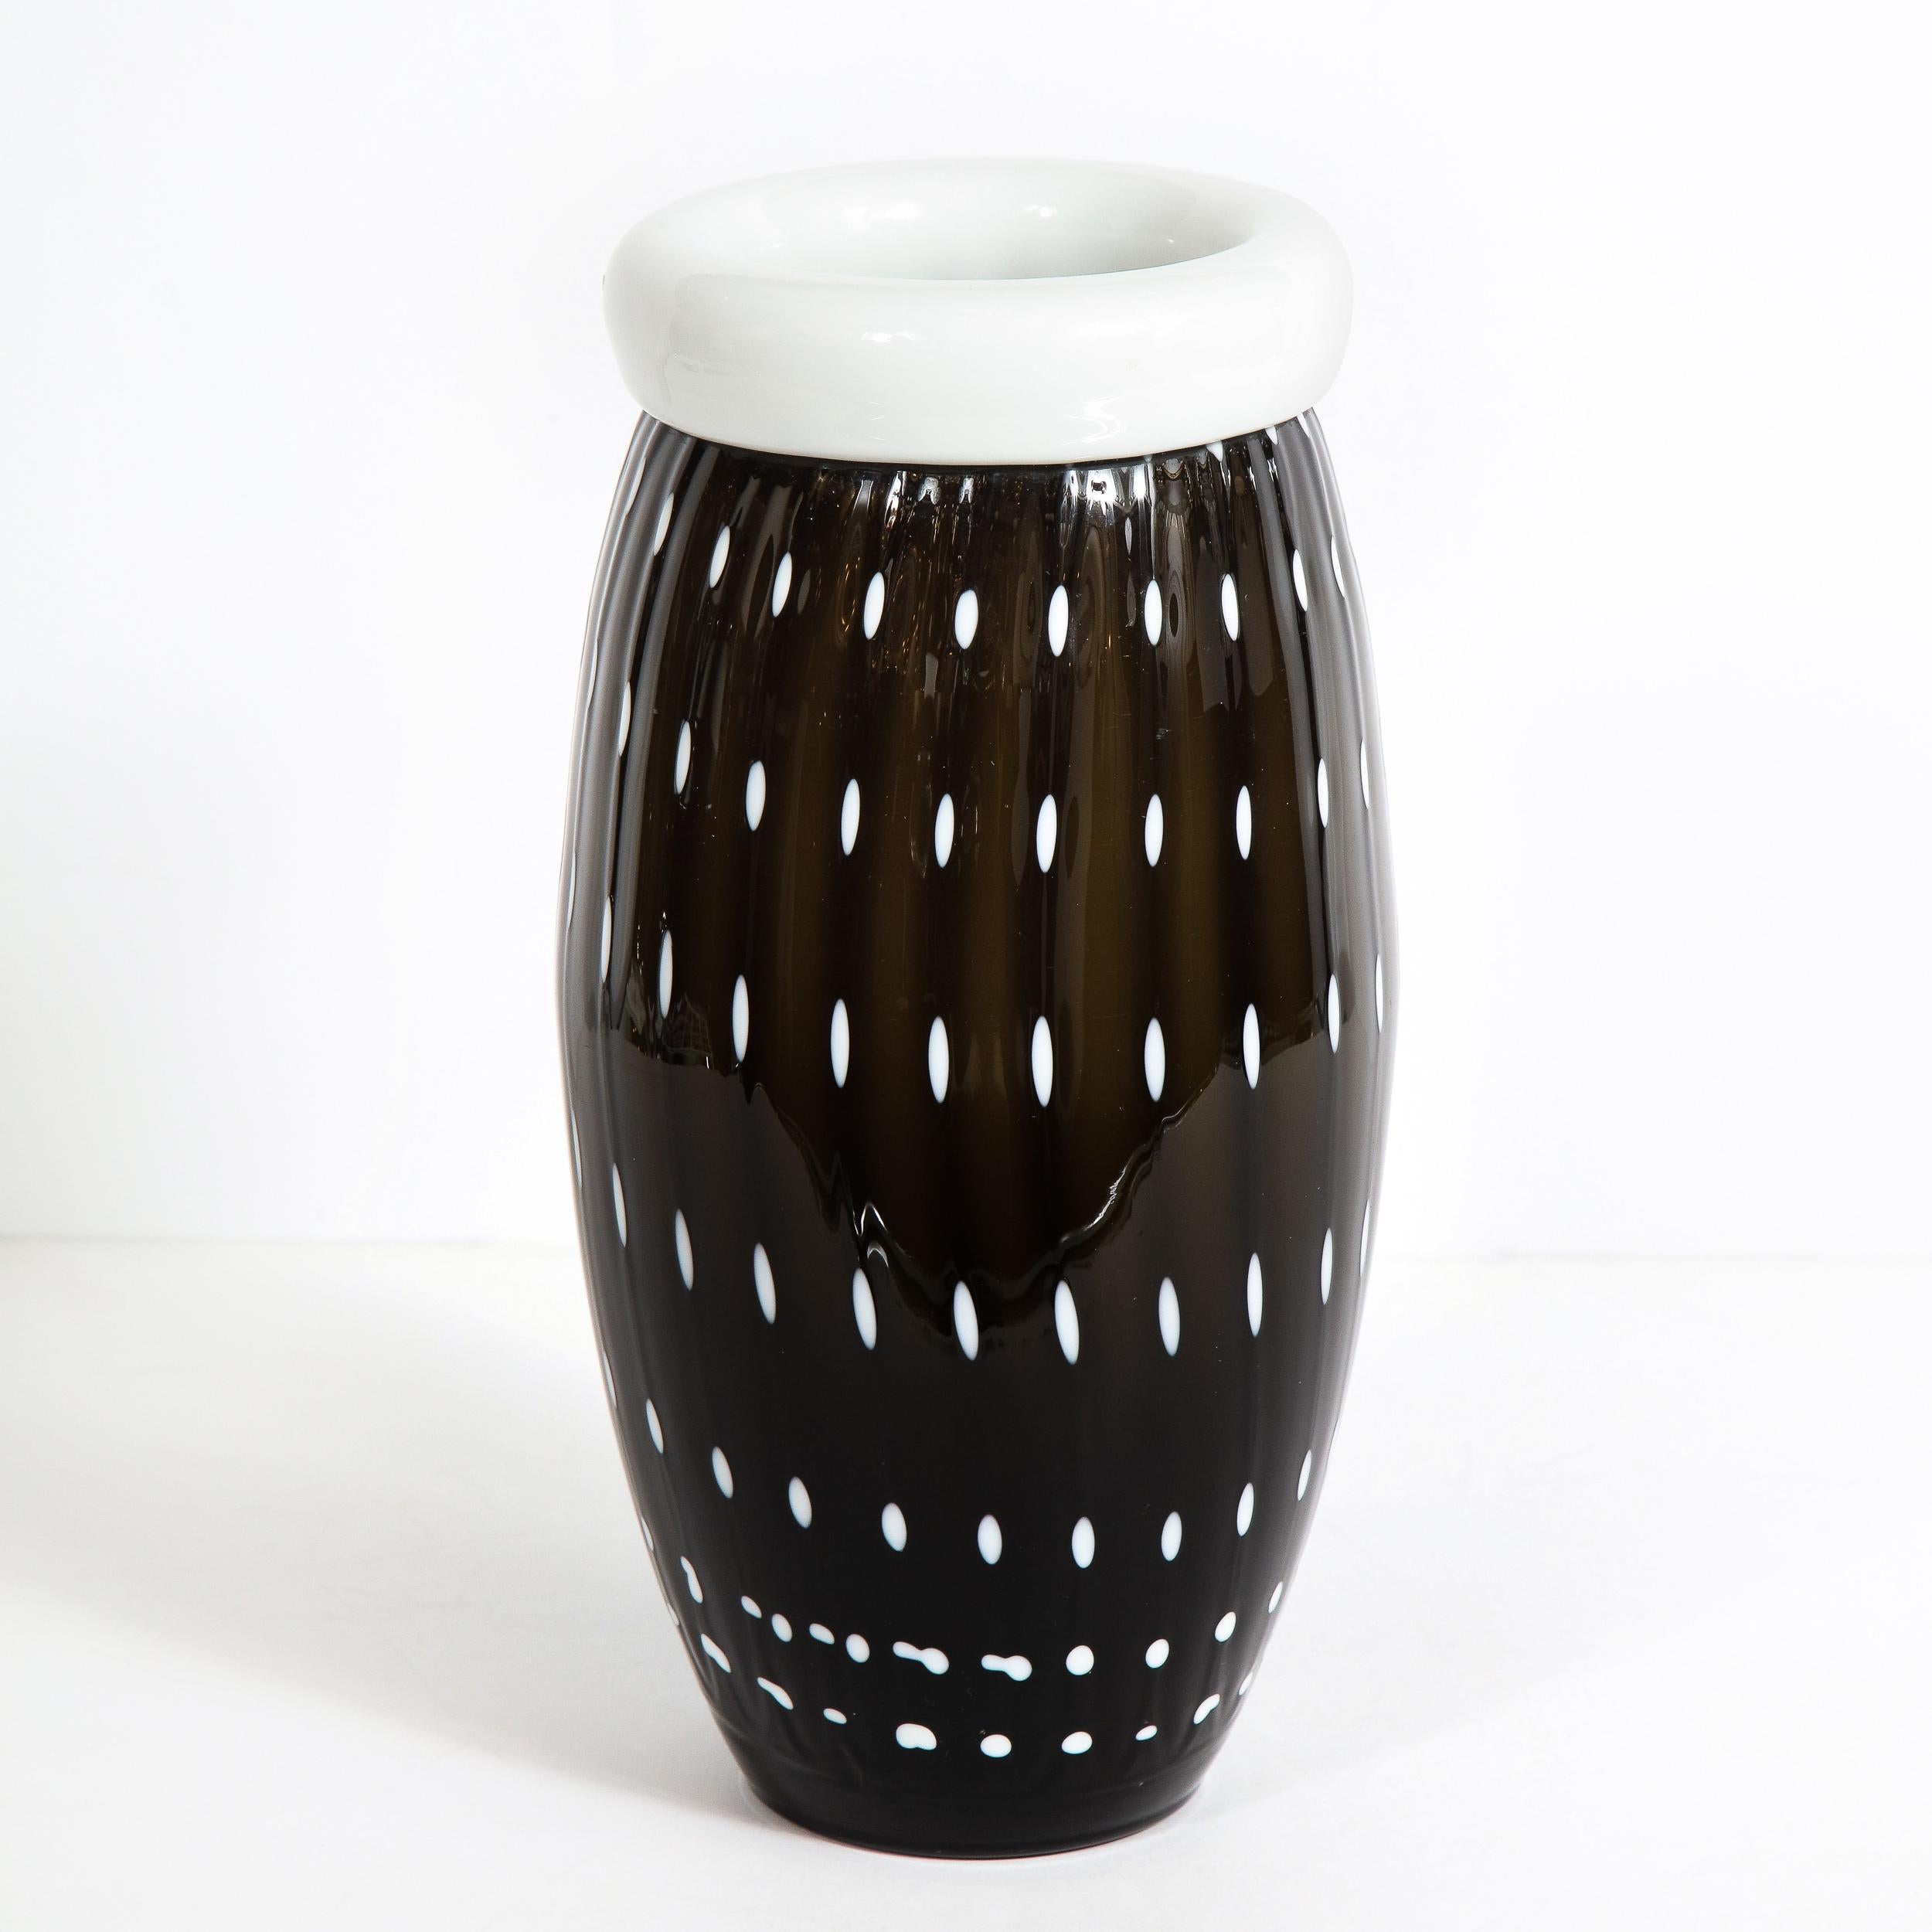 This elegant modernist black and white vase was realized in Murano, Italy- the island off the coast of Venice renowned for centuries for its superlative glass production. It features a cylindrical body that tapers to each end with a white banded